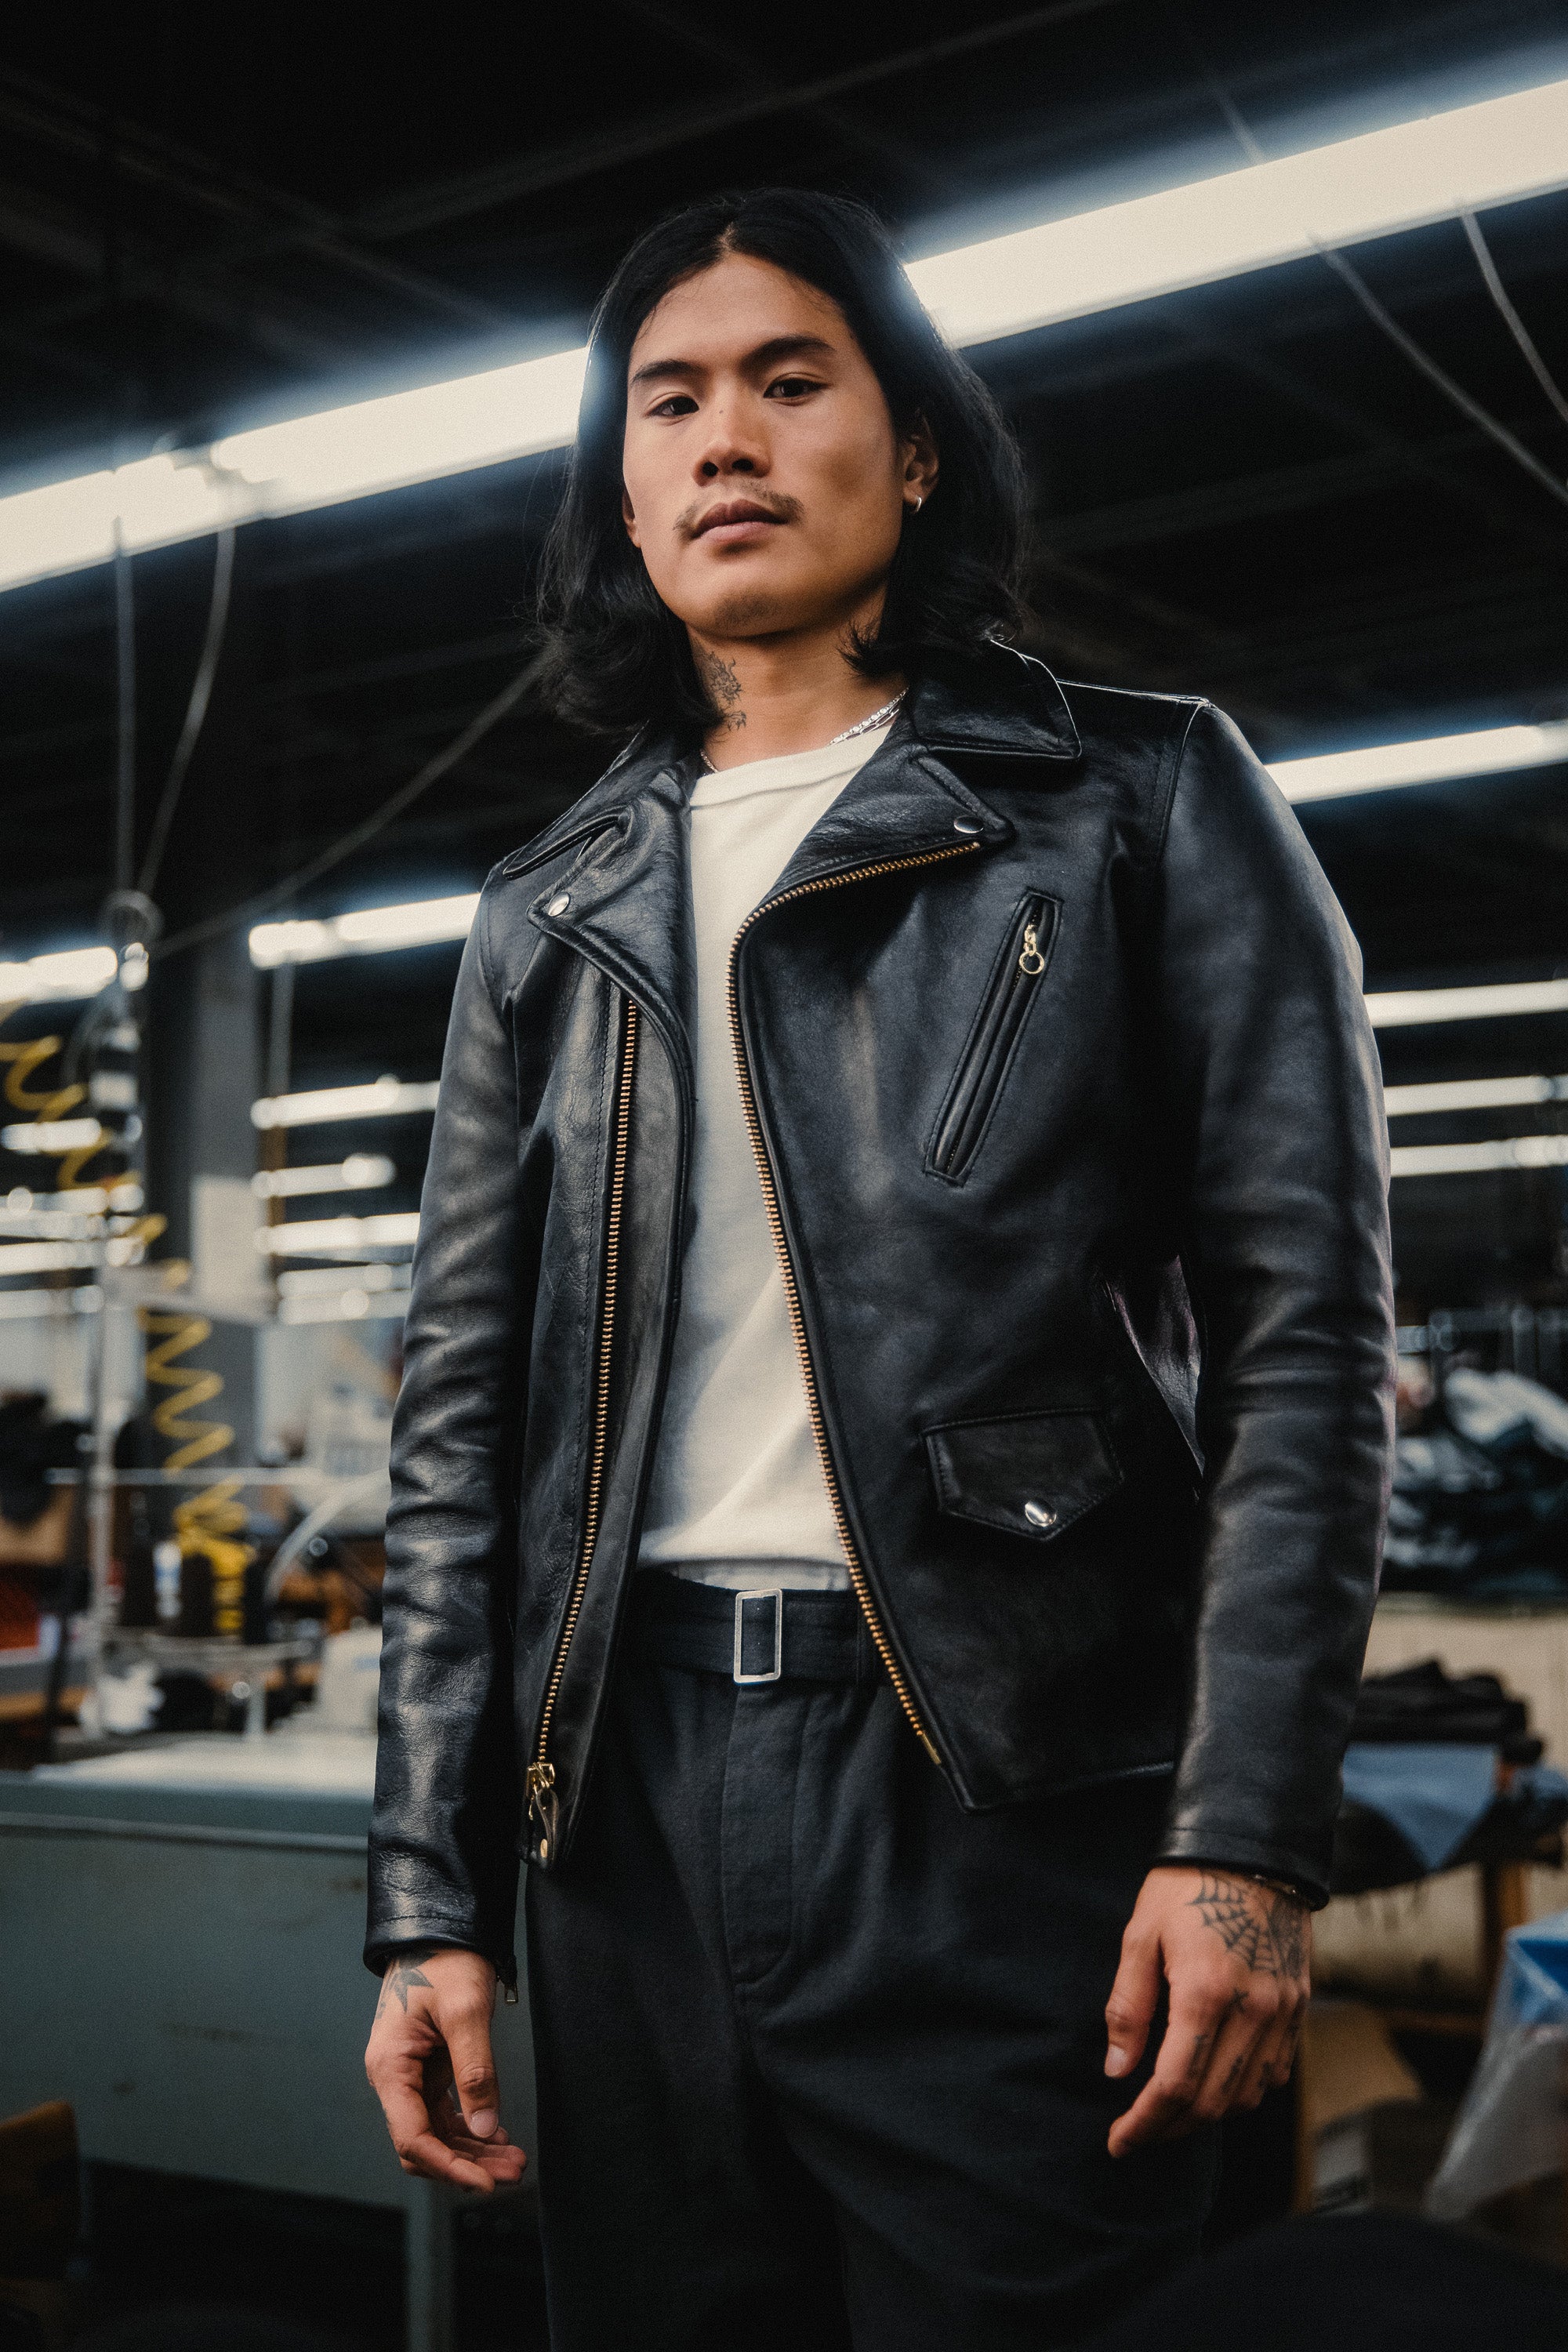 A man wears a black leather jacket using the finished horsehide product.